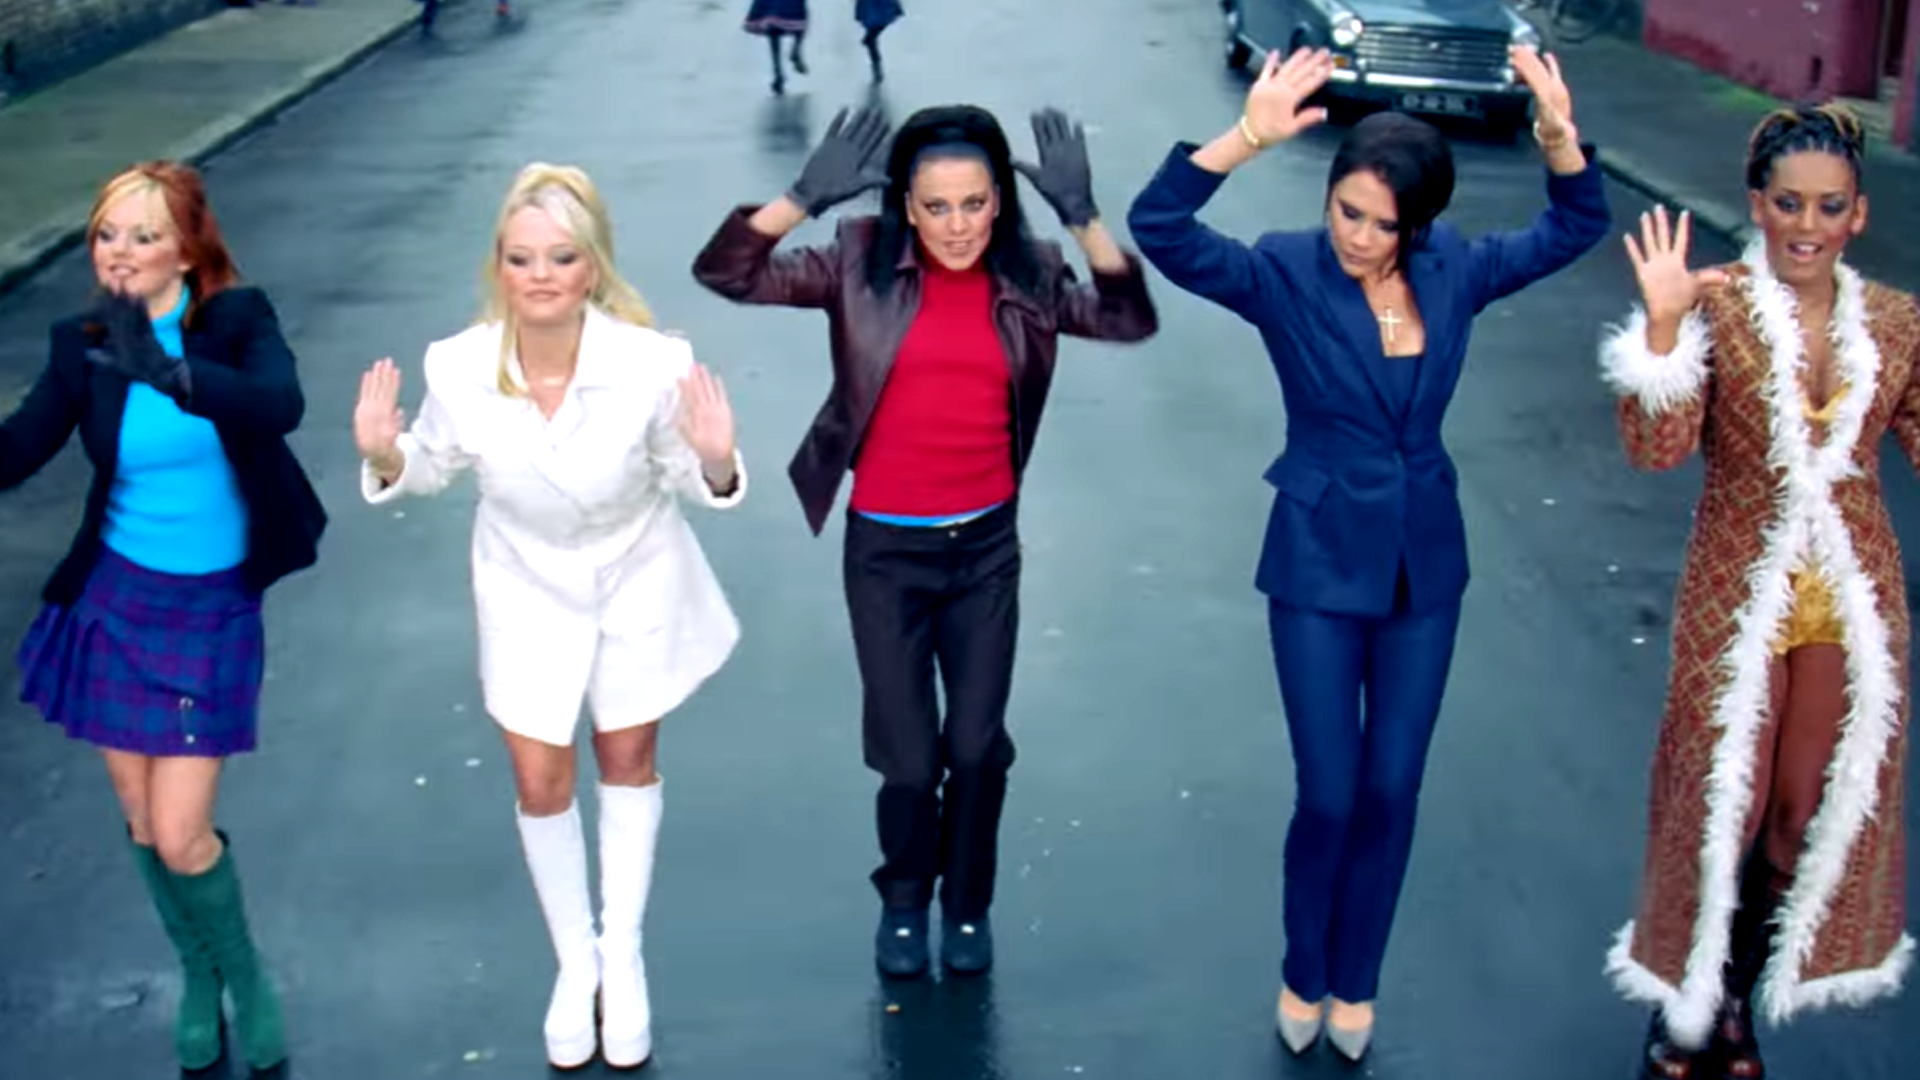 Spice Girls Release Unseen Footage Of The Iconic Stop Dance Scene For Their 25th Anniversary